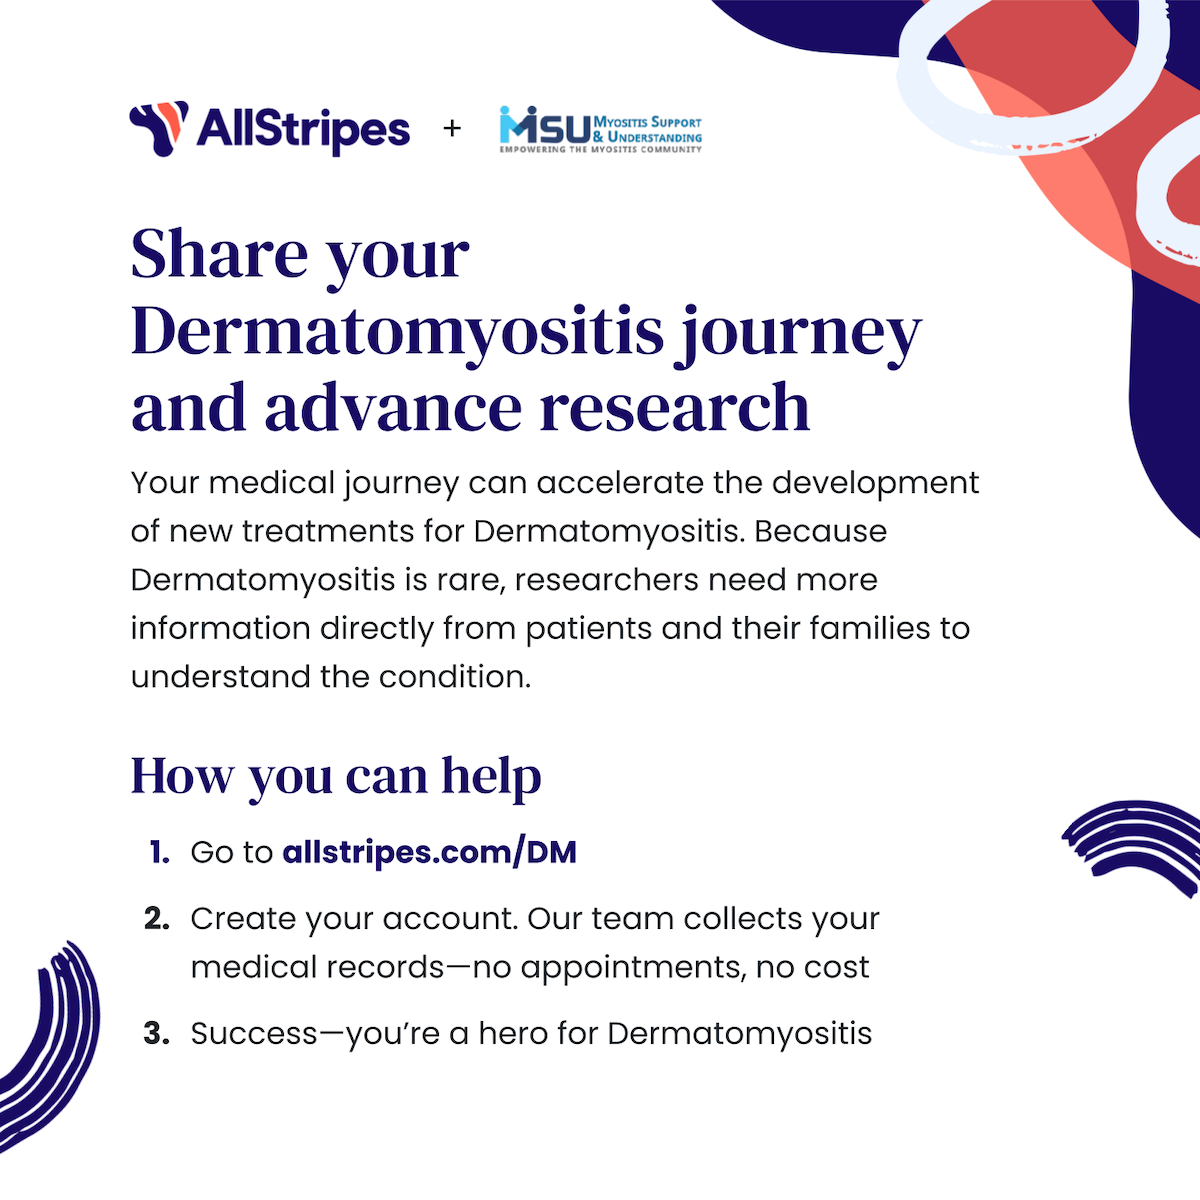 Myositis Support & Understanding and AllStripes are partnering to create a database that will enable new Dermatomyositis research projects!